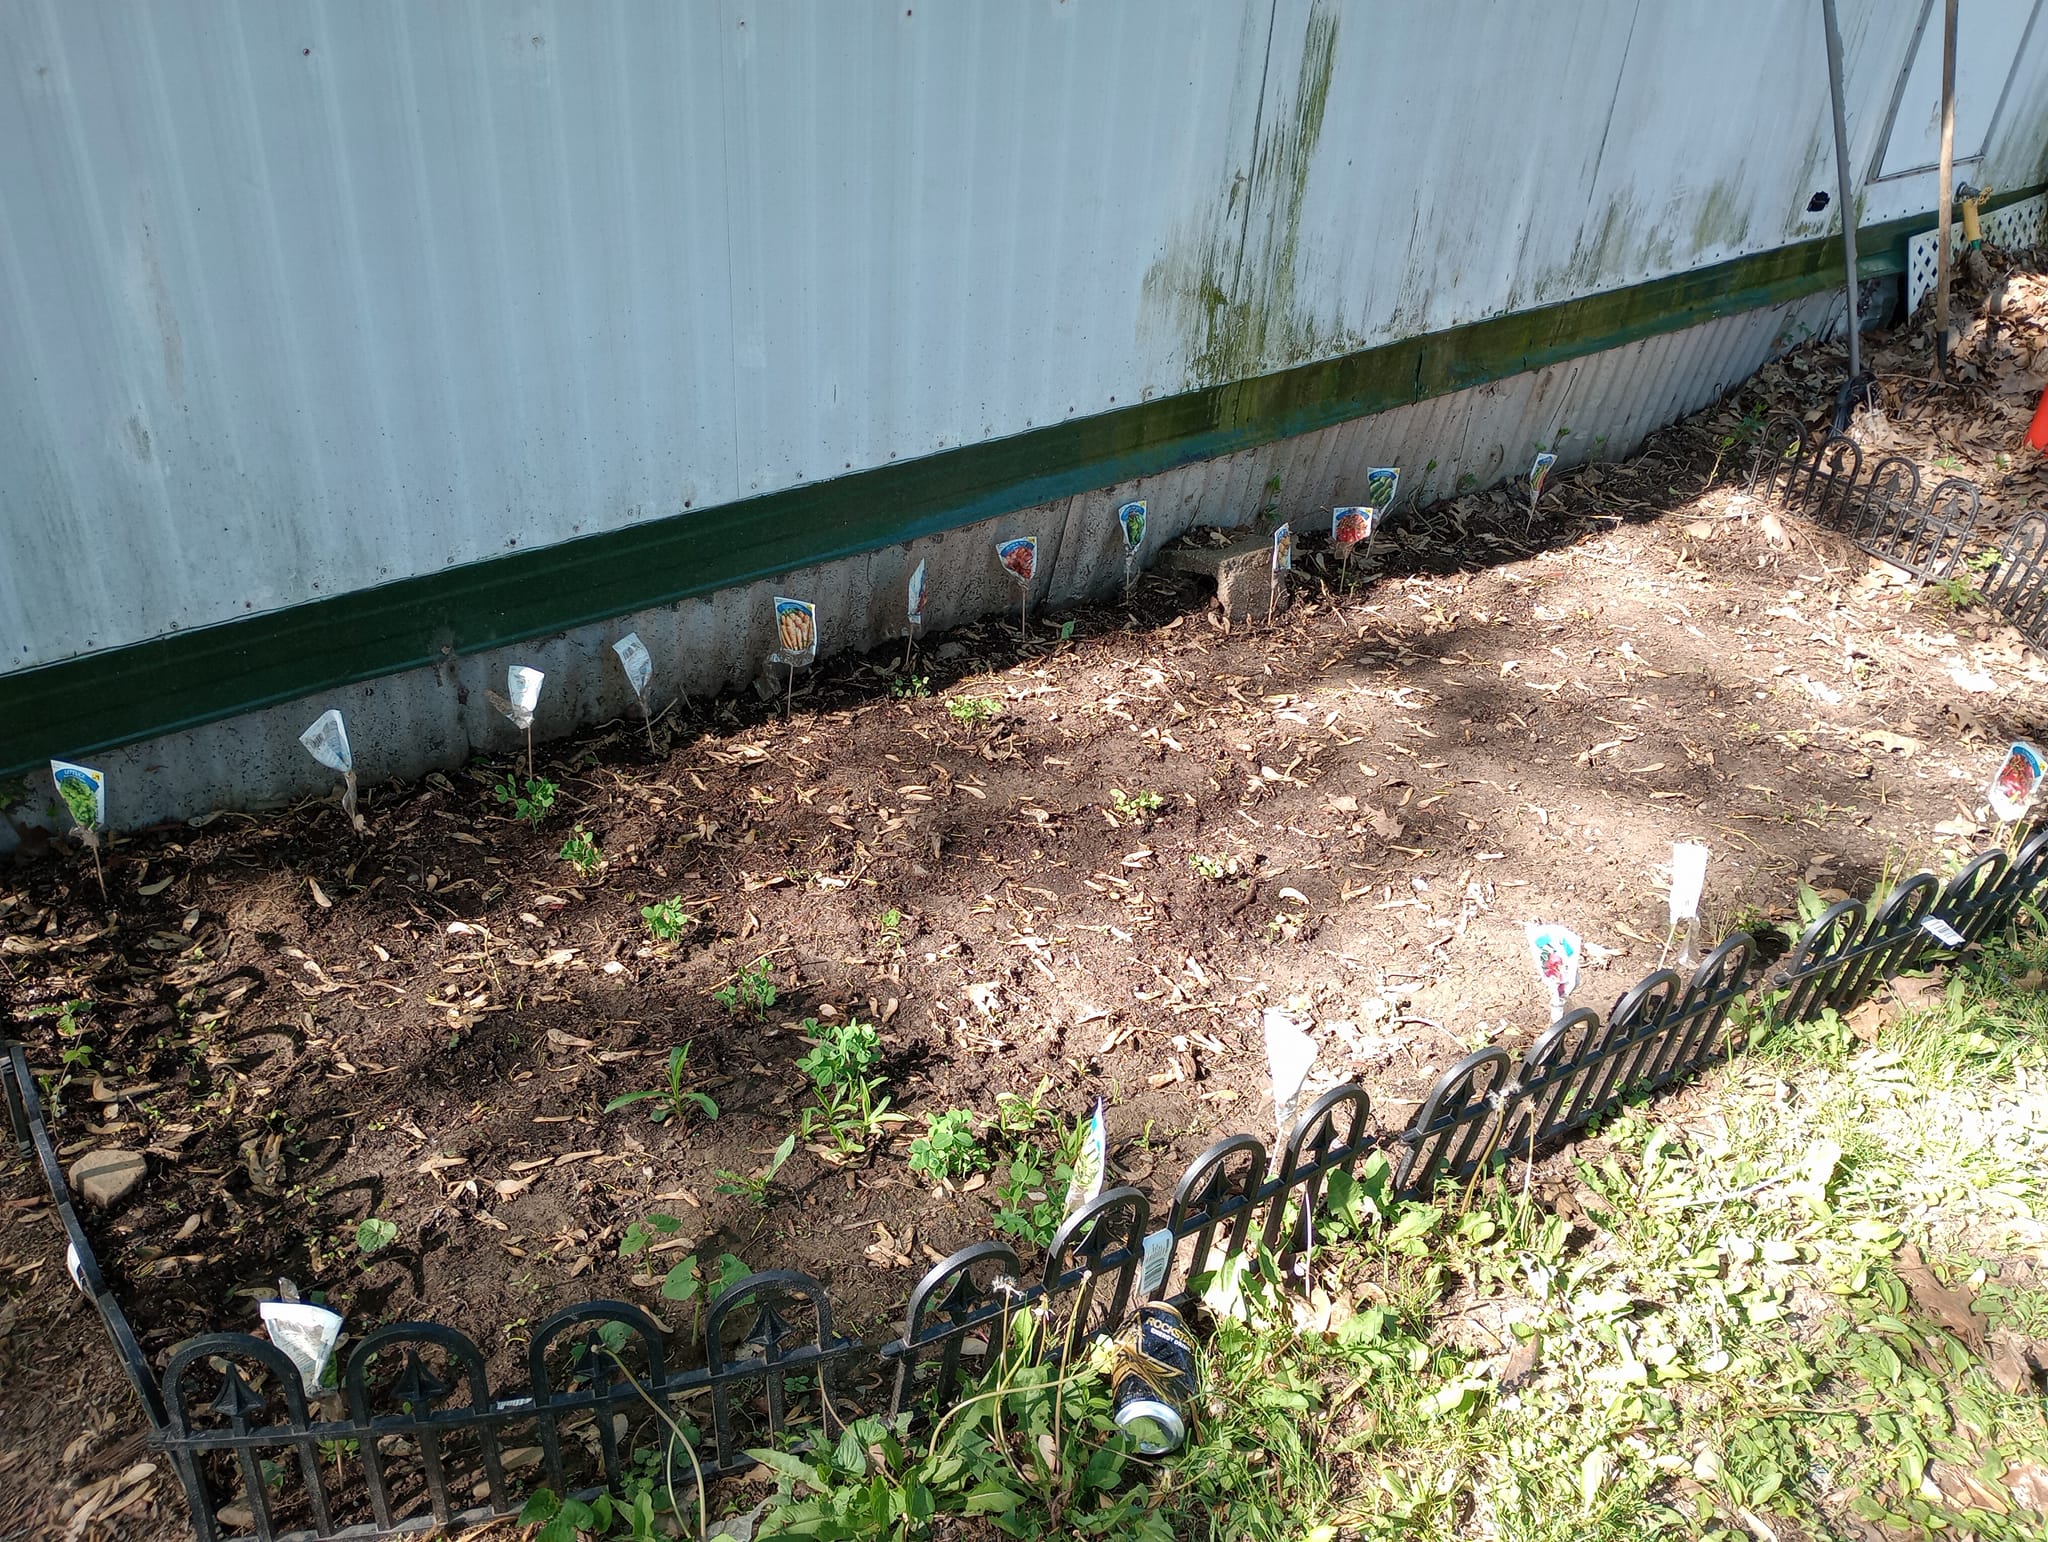 My vegetable garden is starting to grow. Tomatoes green beans peas lettuce spinach radish carrots cucumbers corn red peppers green peppers and watermelon